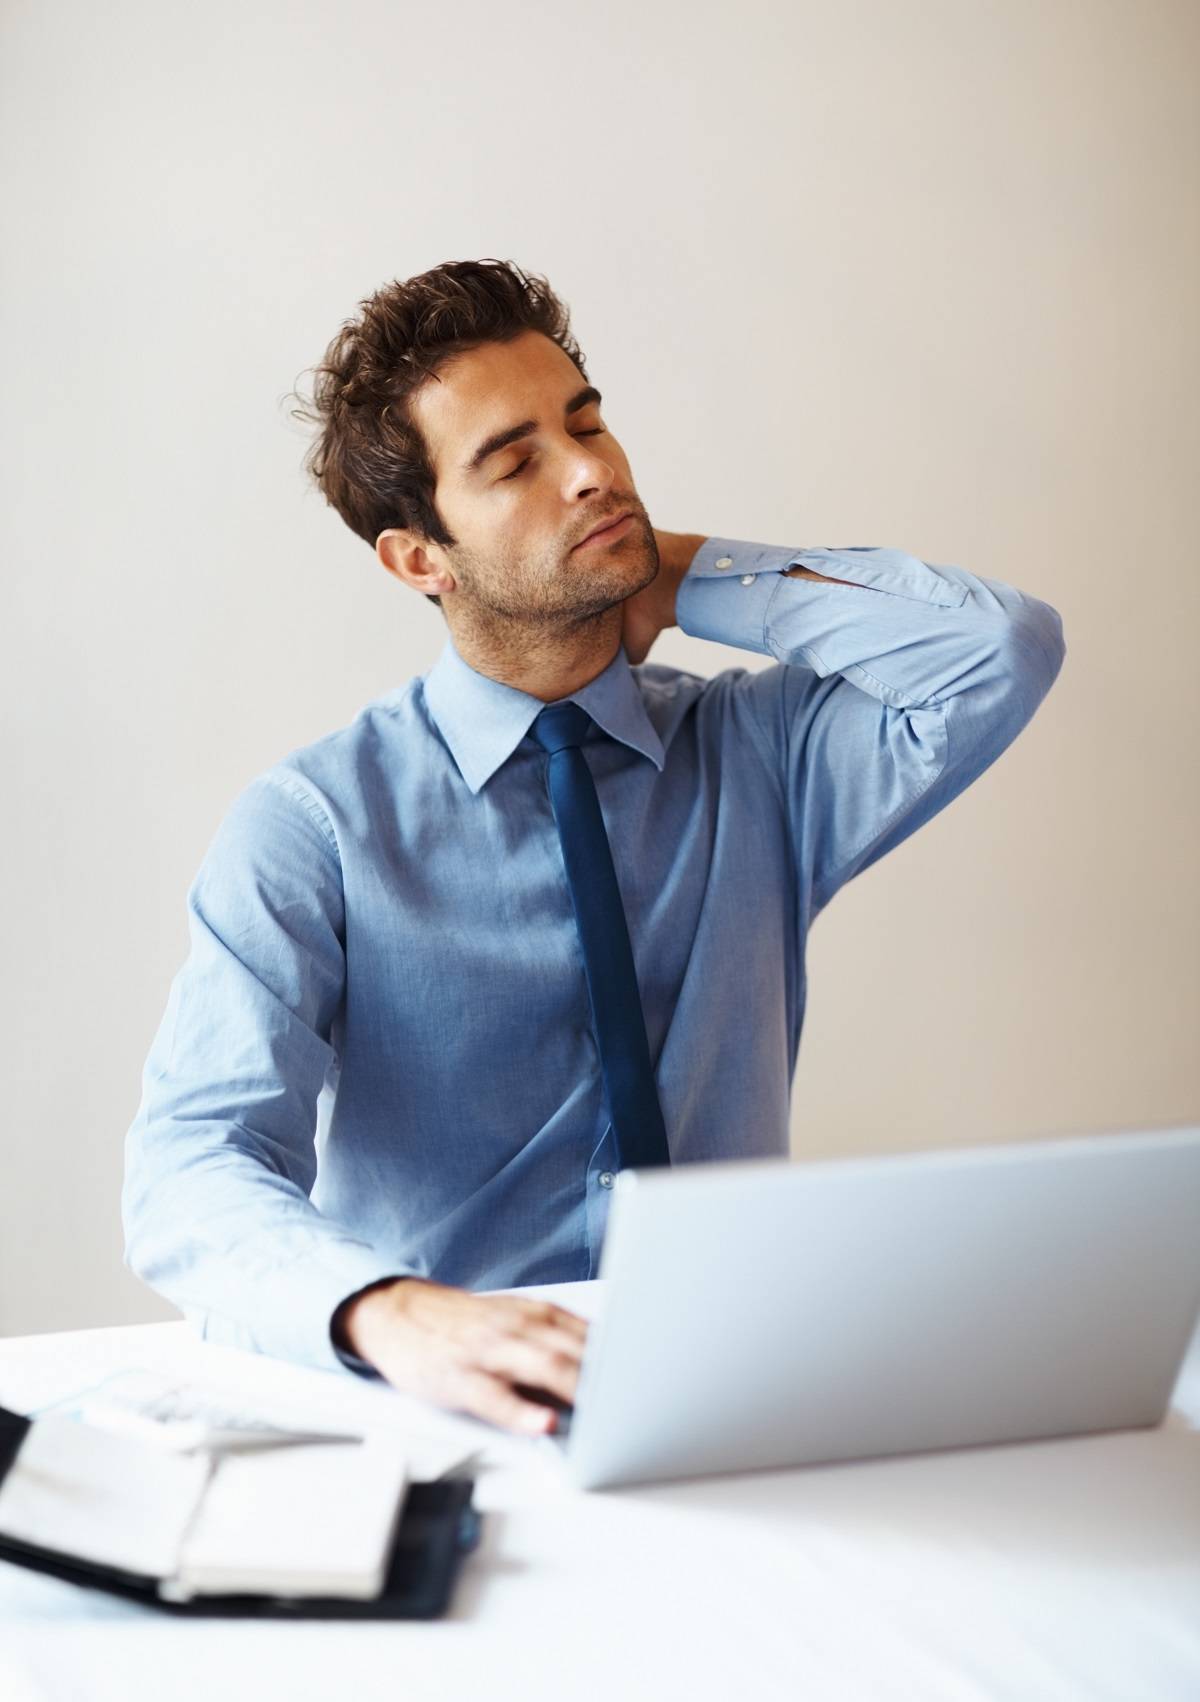 back-pain-at-work-4-ways-to-ease-the-pain